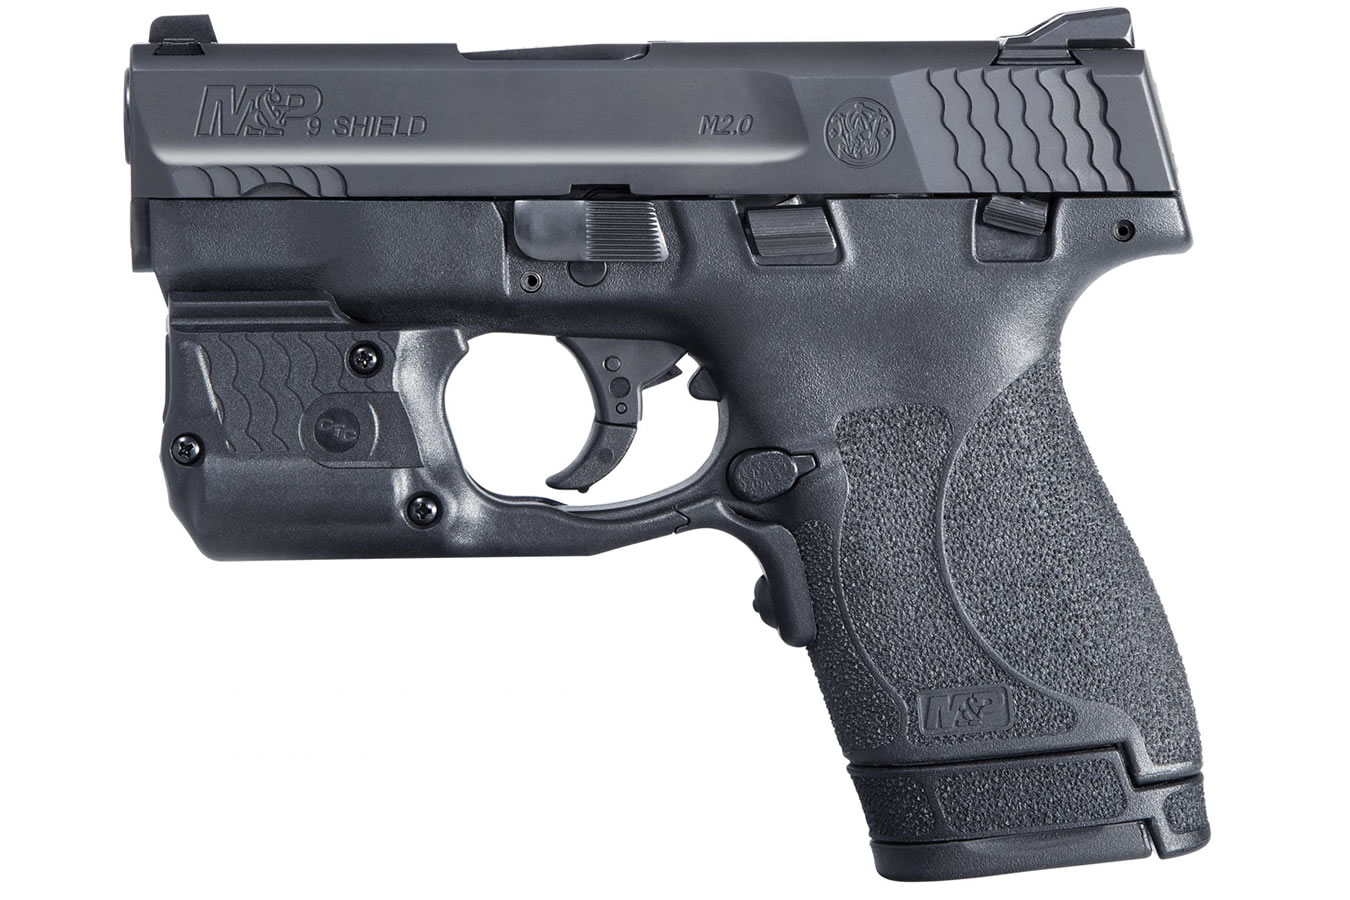 S&W MP9 Shield M2.0 Laserguard Pro Green Laser and Light Combo.